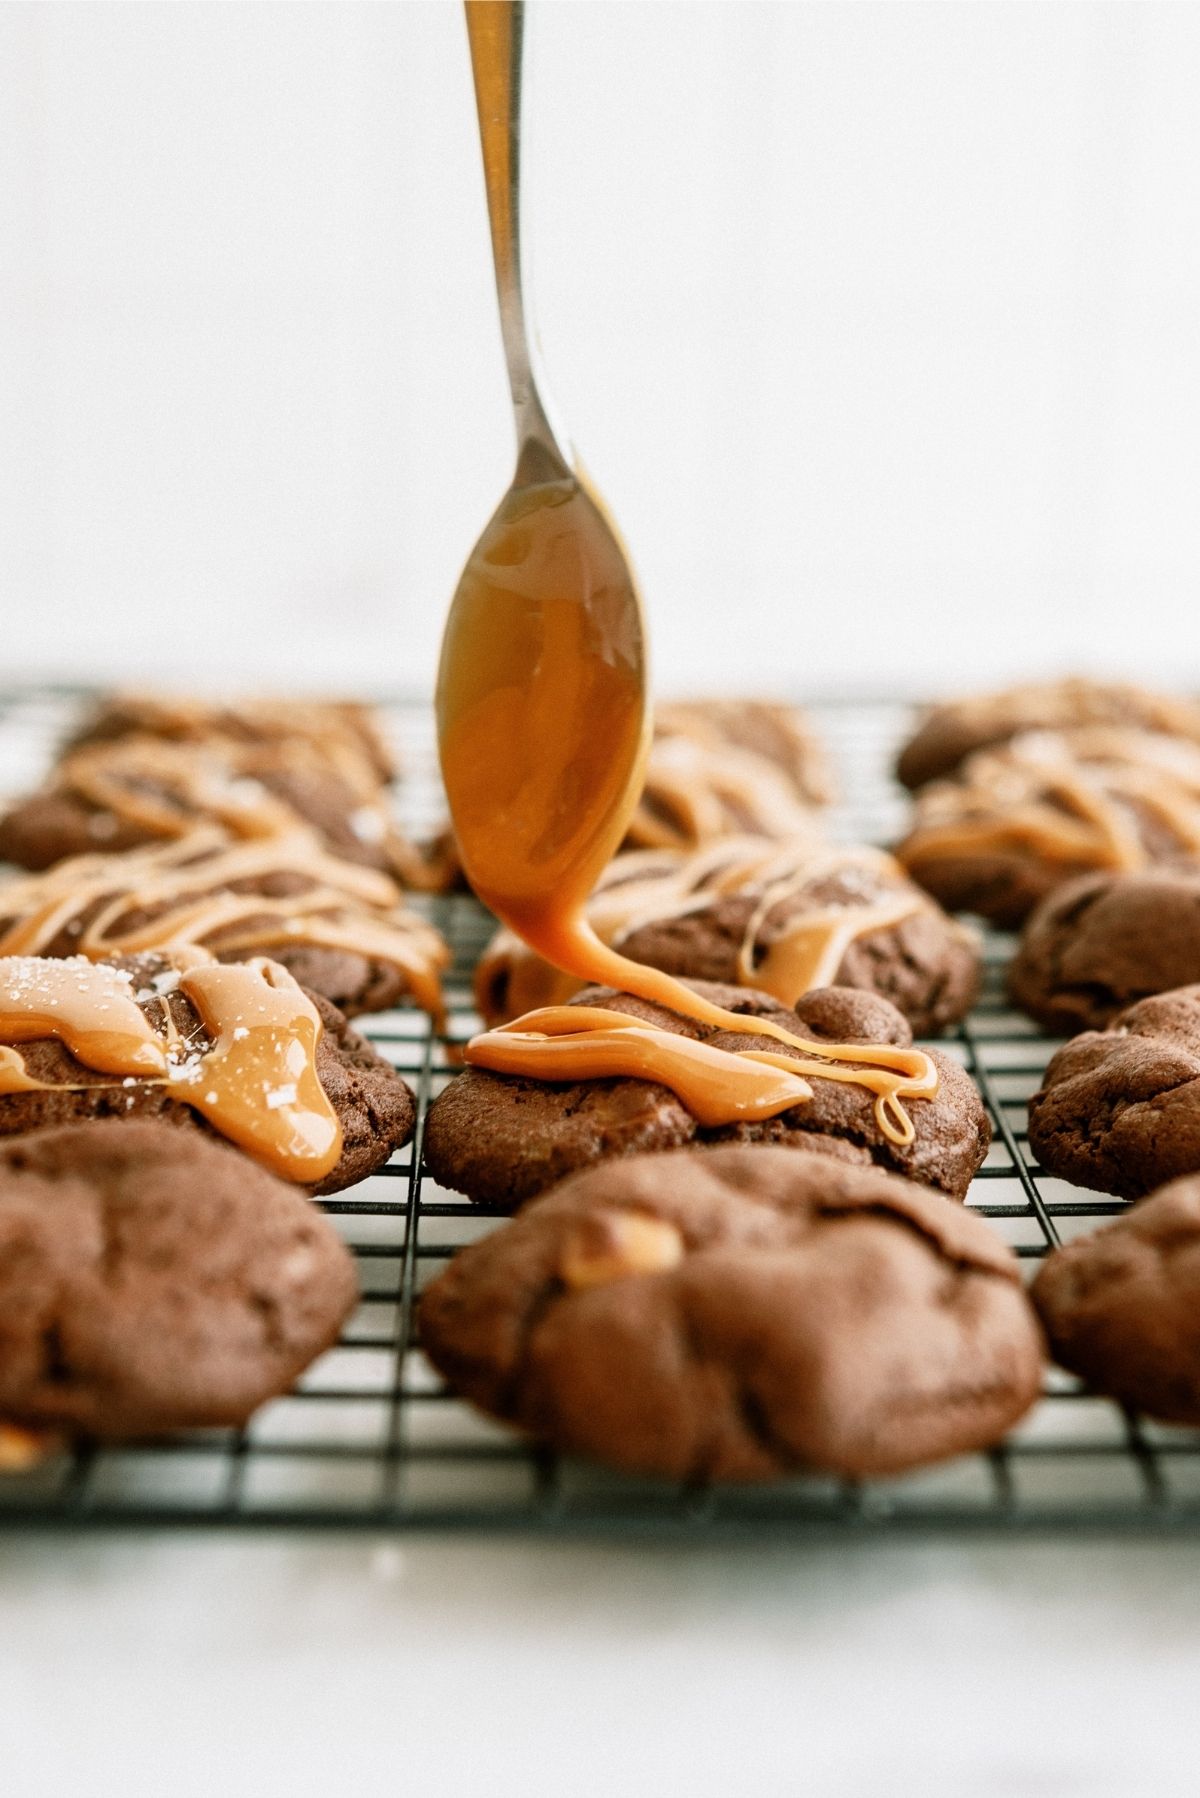 Drizzle caramel on baked and cooled Salted Caramel Chocolate Cookies